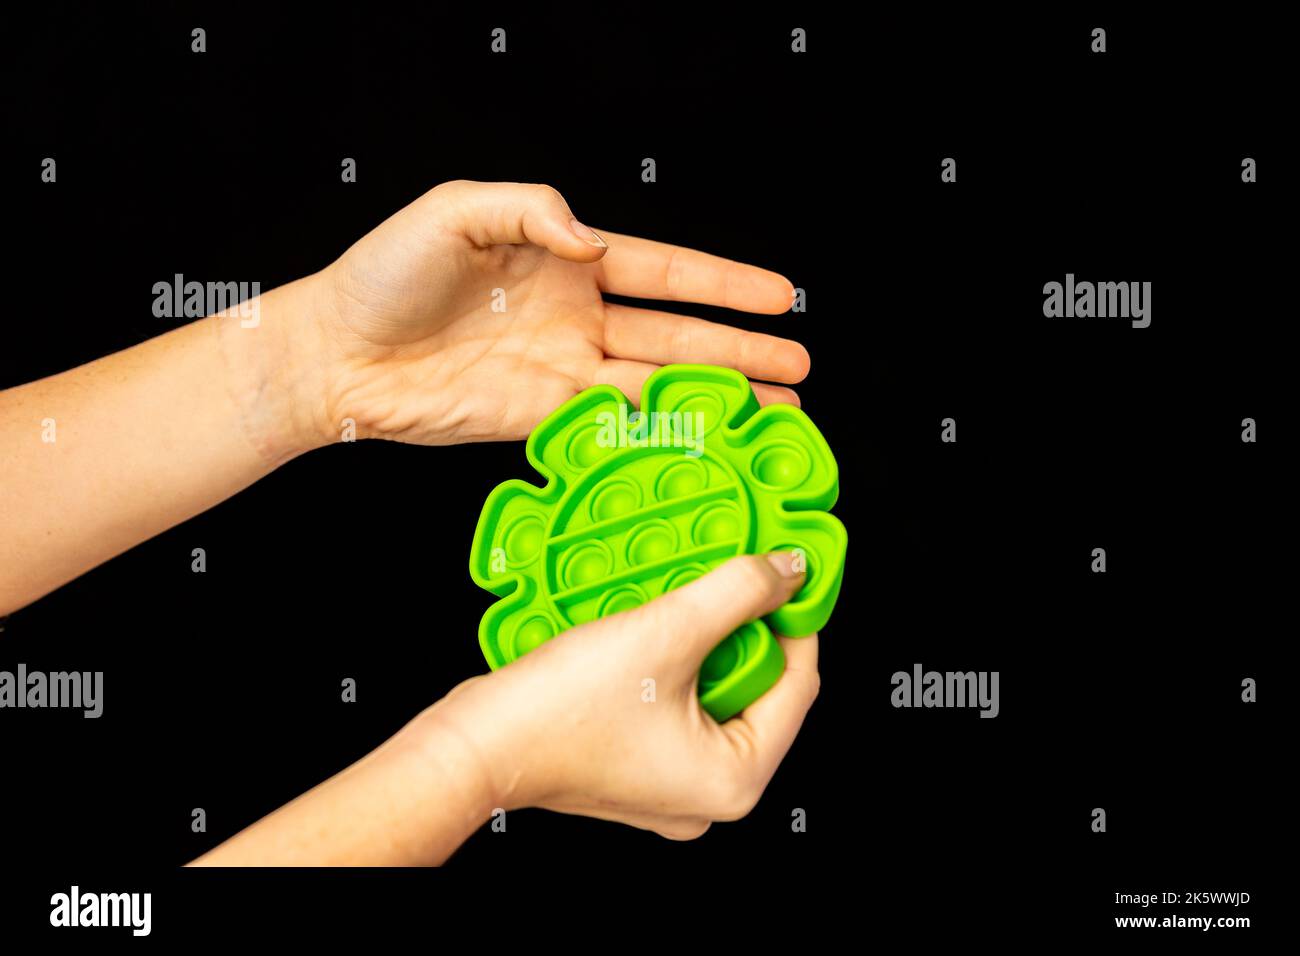 Child playing with a popping fidget toy Stock Photo